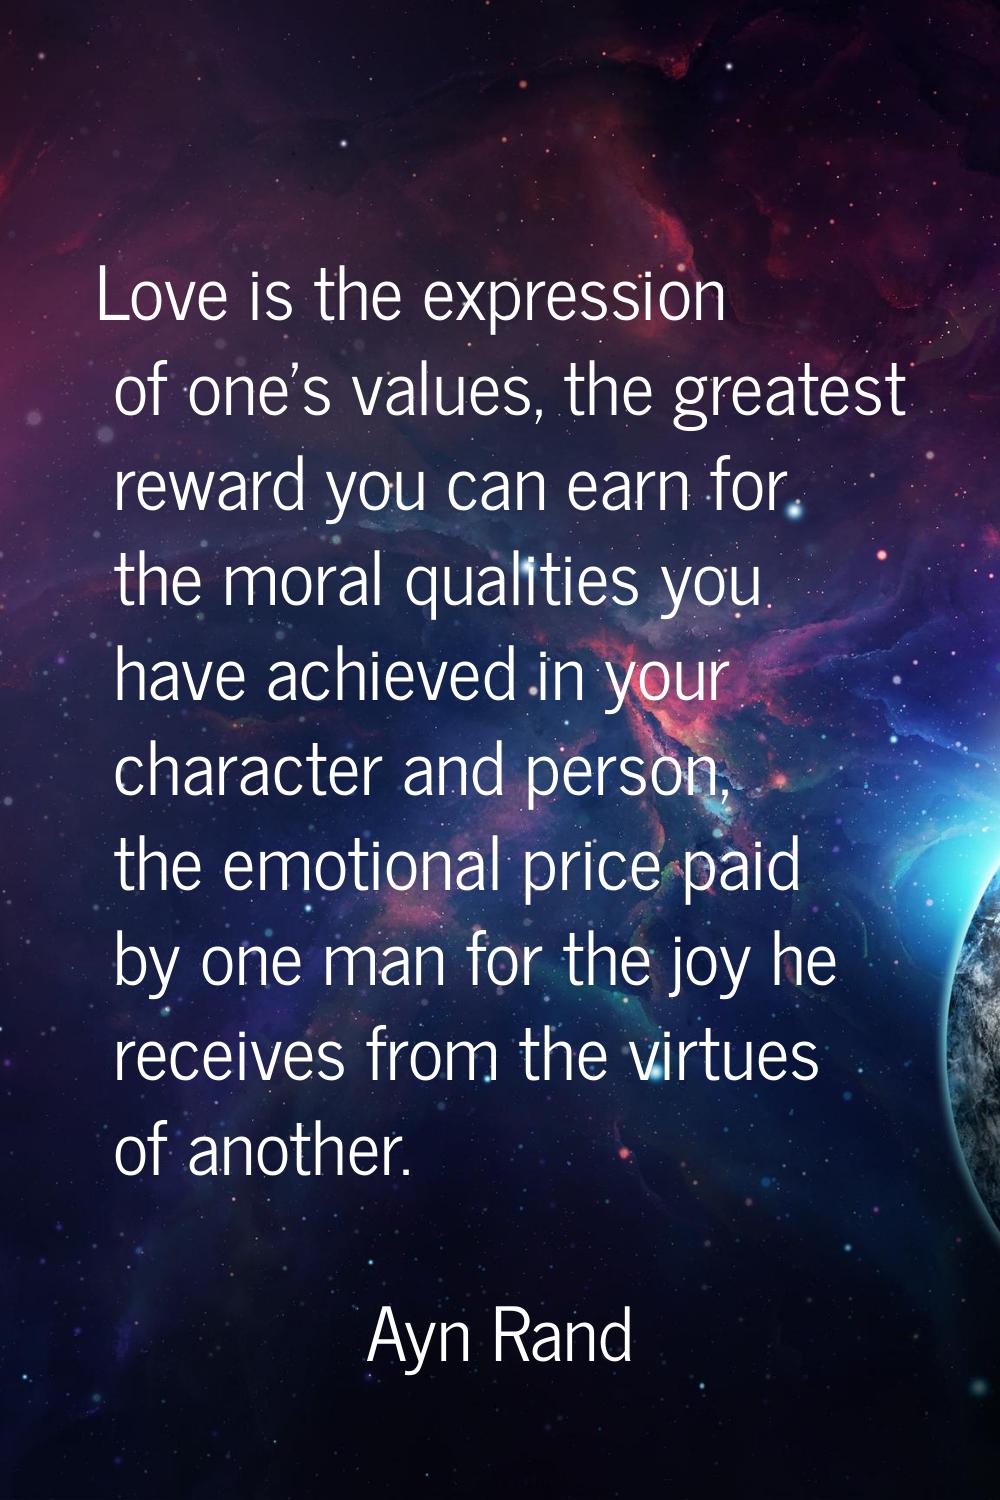 Love is the expression of one's values, the greatest reward you can earn for the moral qualities yo